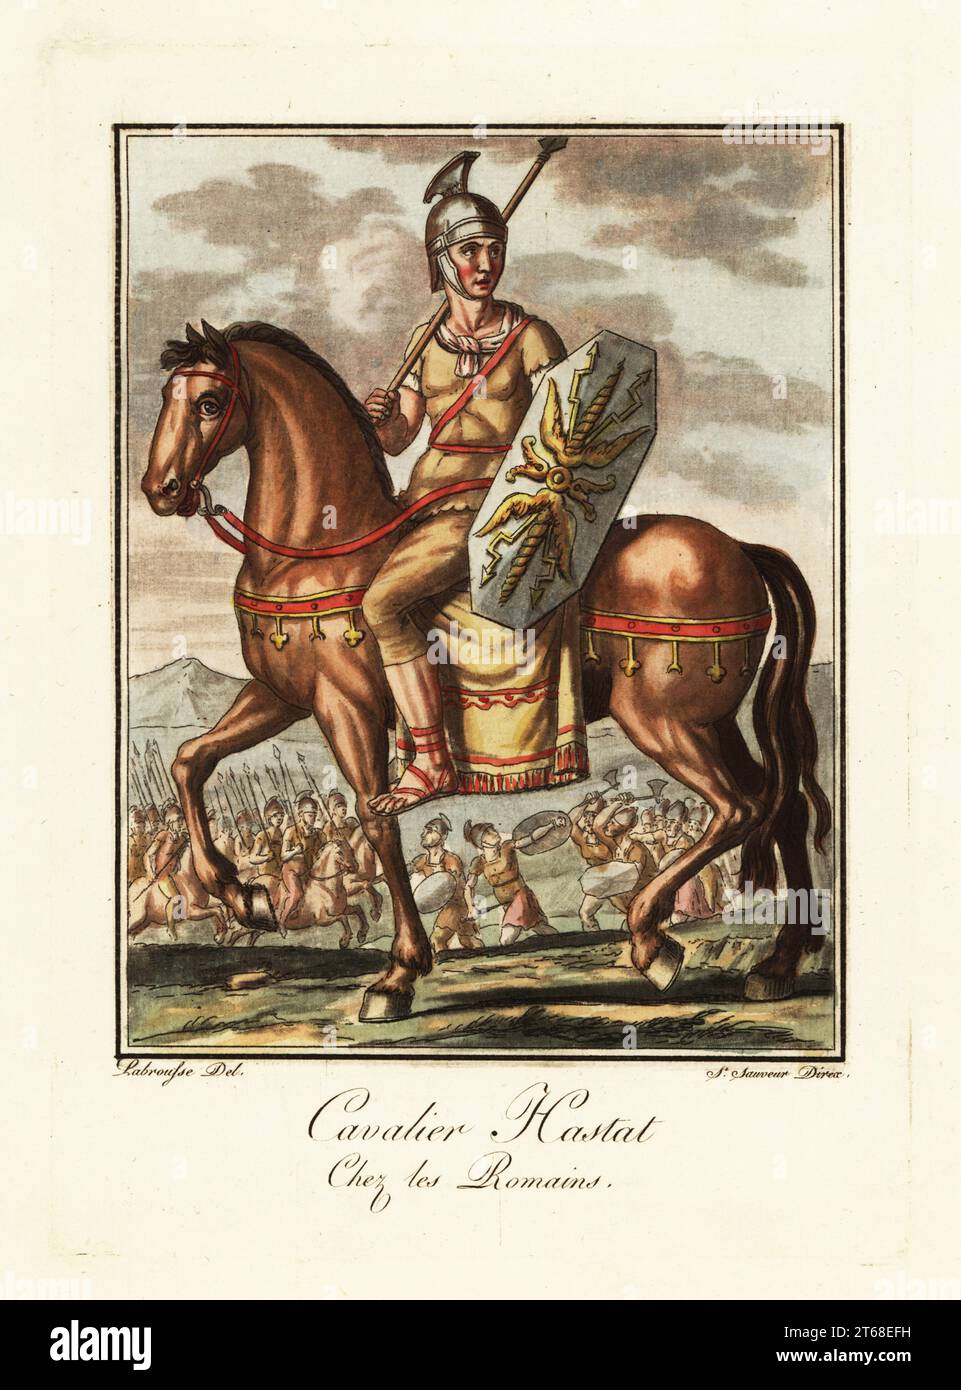 Roman hastatus or mounted lancer, ancient Rome. Mounted on a horse, wearing galea helmet, tunic, baldric belt, sagulum gregale or short trousers. Armed with shield and spear. In the background, a cohort of lancers in battle. Cavalier Hastat chez les Romains. Handcoloured copperplate drawn and engraved by L. Labrousse, artist of Bordeaux, under the direction of Jacques Grasset de Saint-Sauveur from his Lantique Rome, ou description historique et pittoresque, Ancient Rome, or historical and picturesque description, Chez Deroy, Paris, 1796. Stock Photo